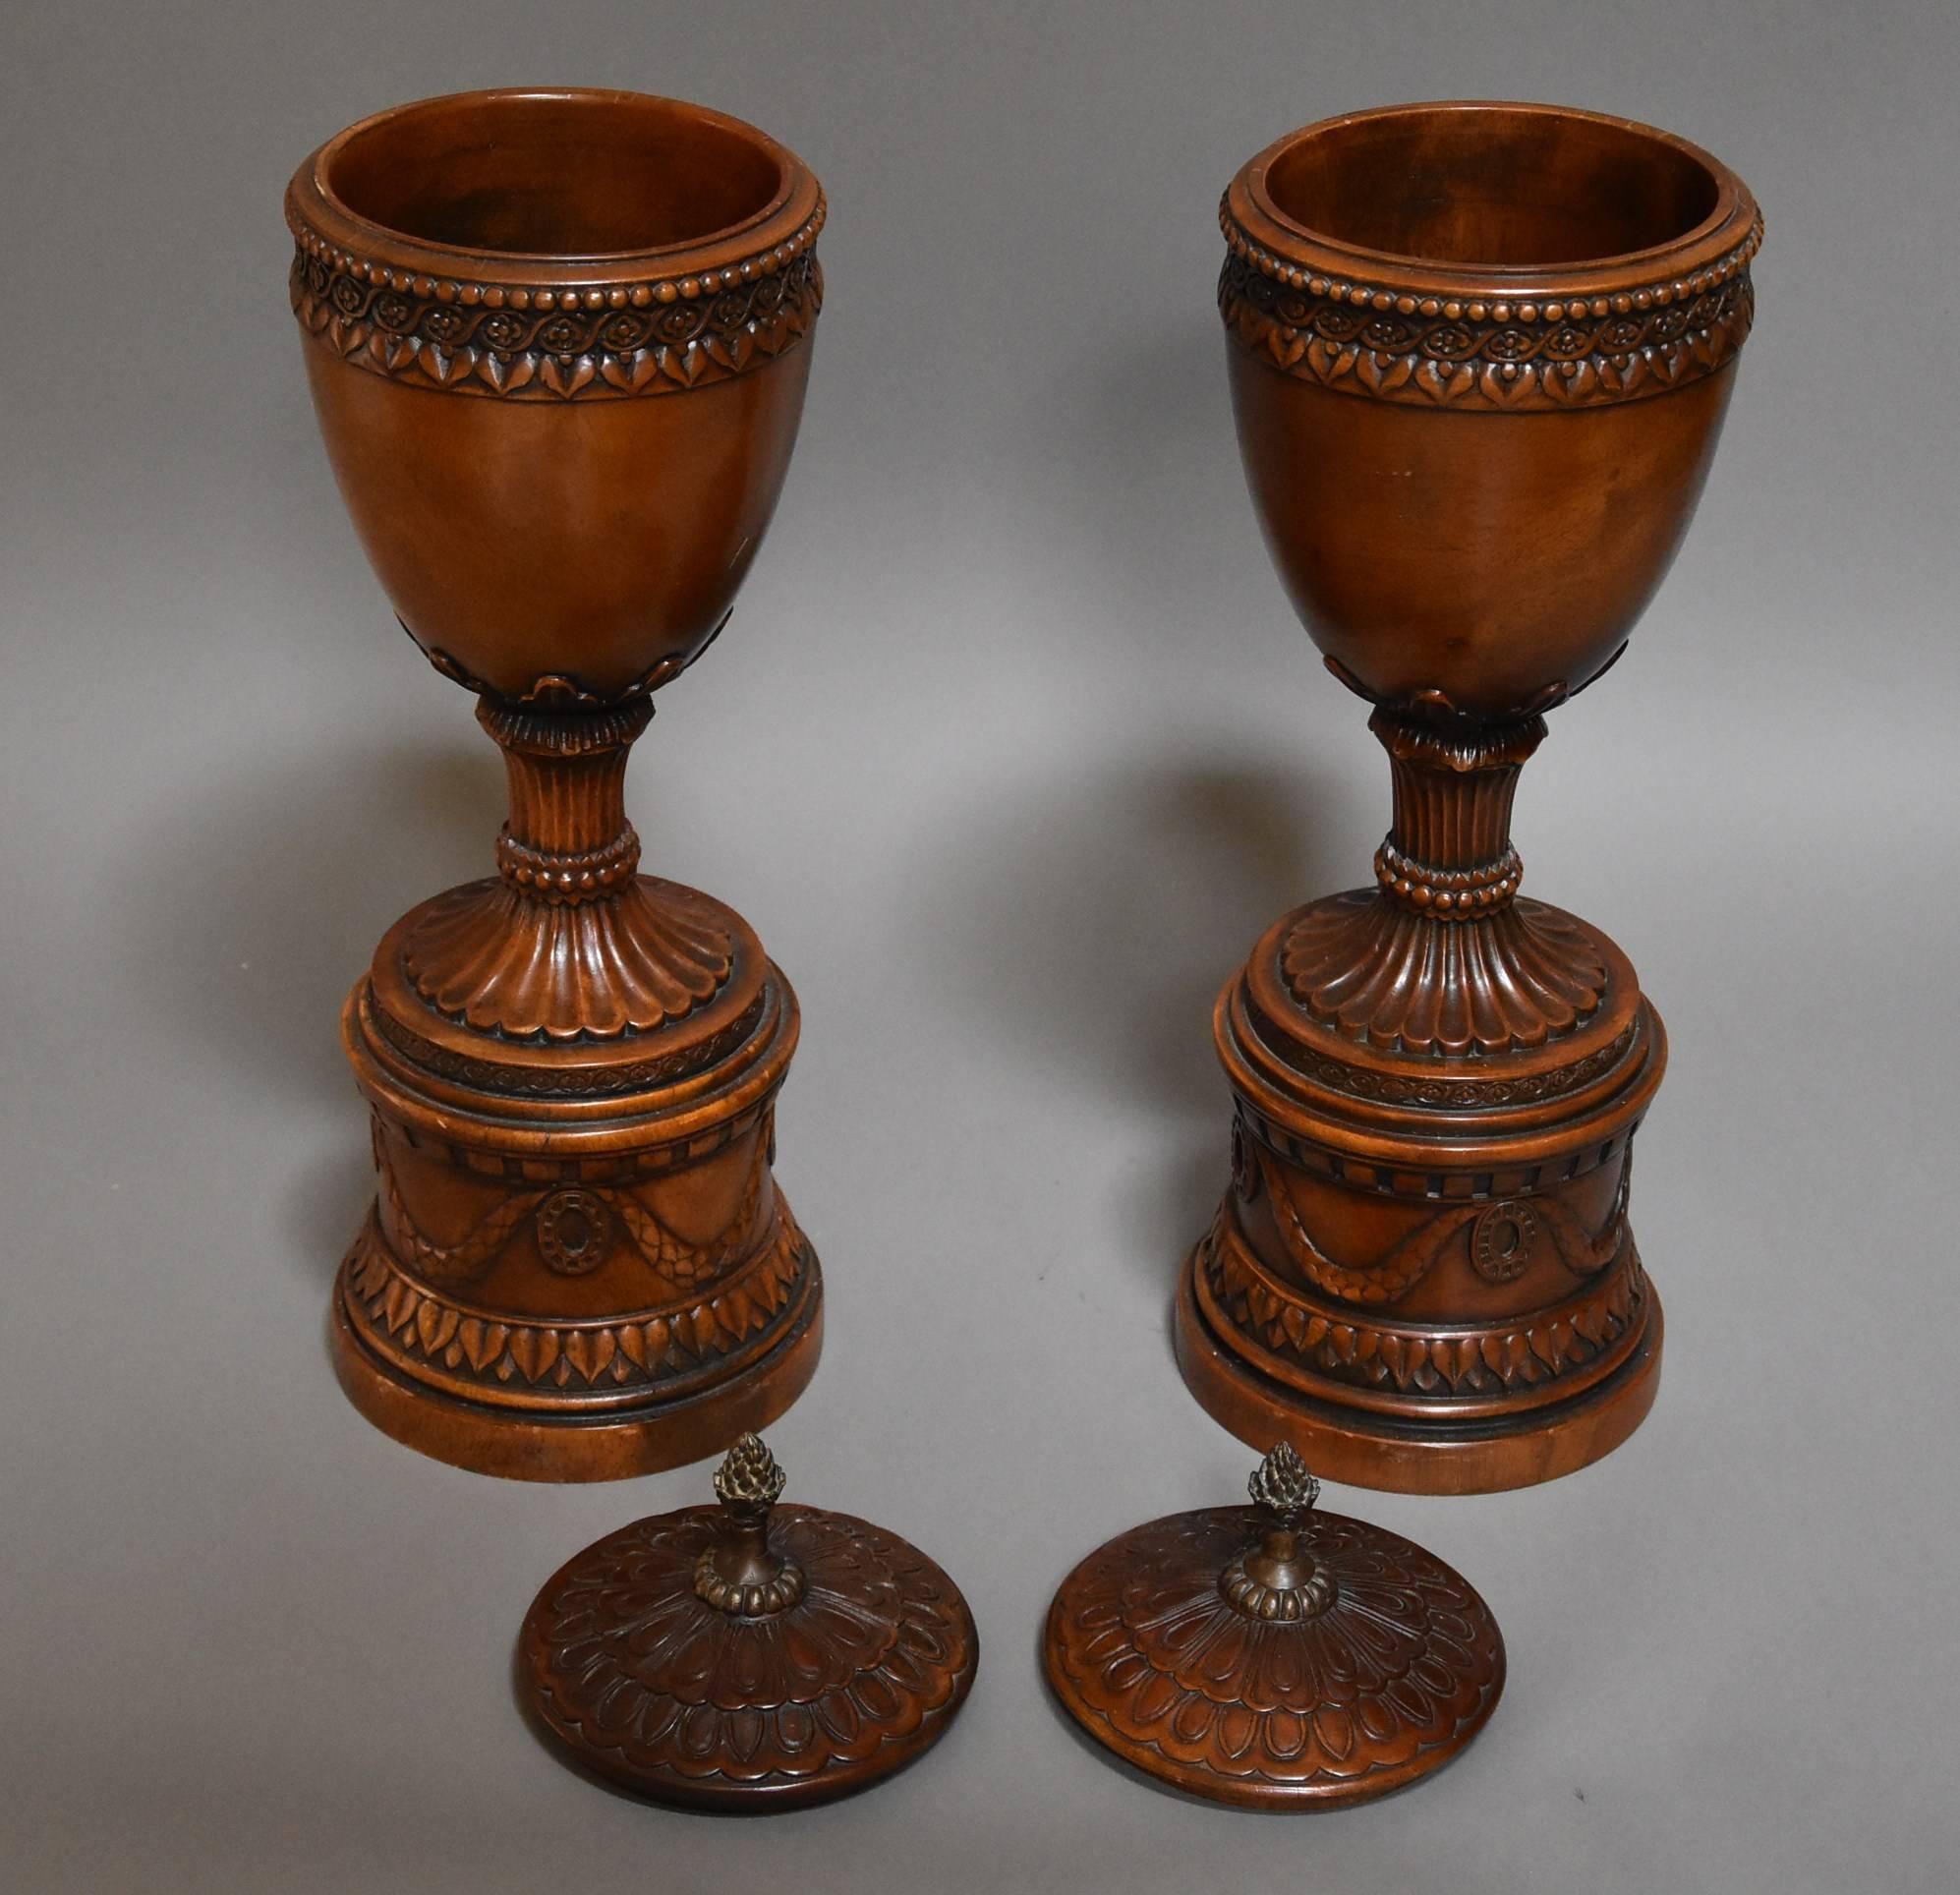 Pair of Early 20th Century Decorative Wooden Urns with Lids 4